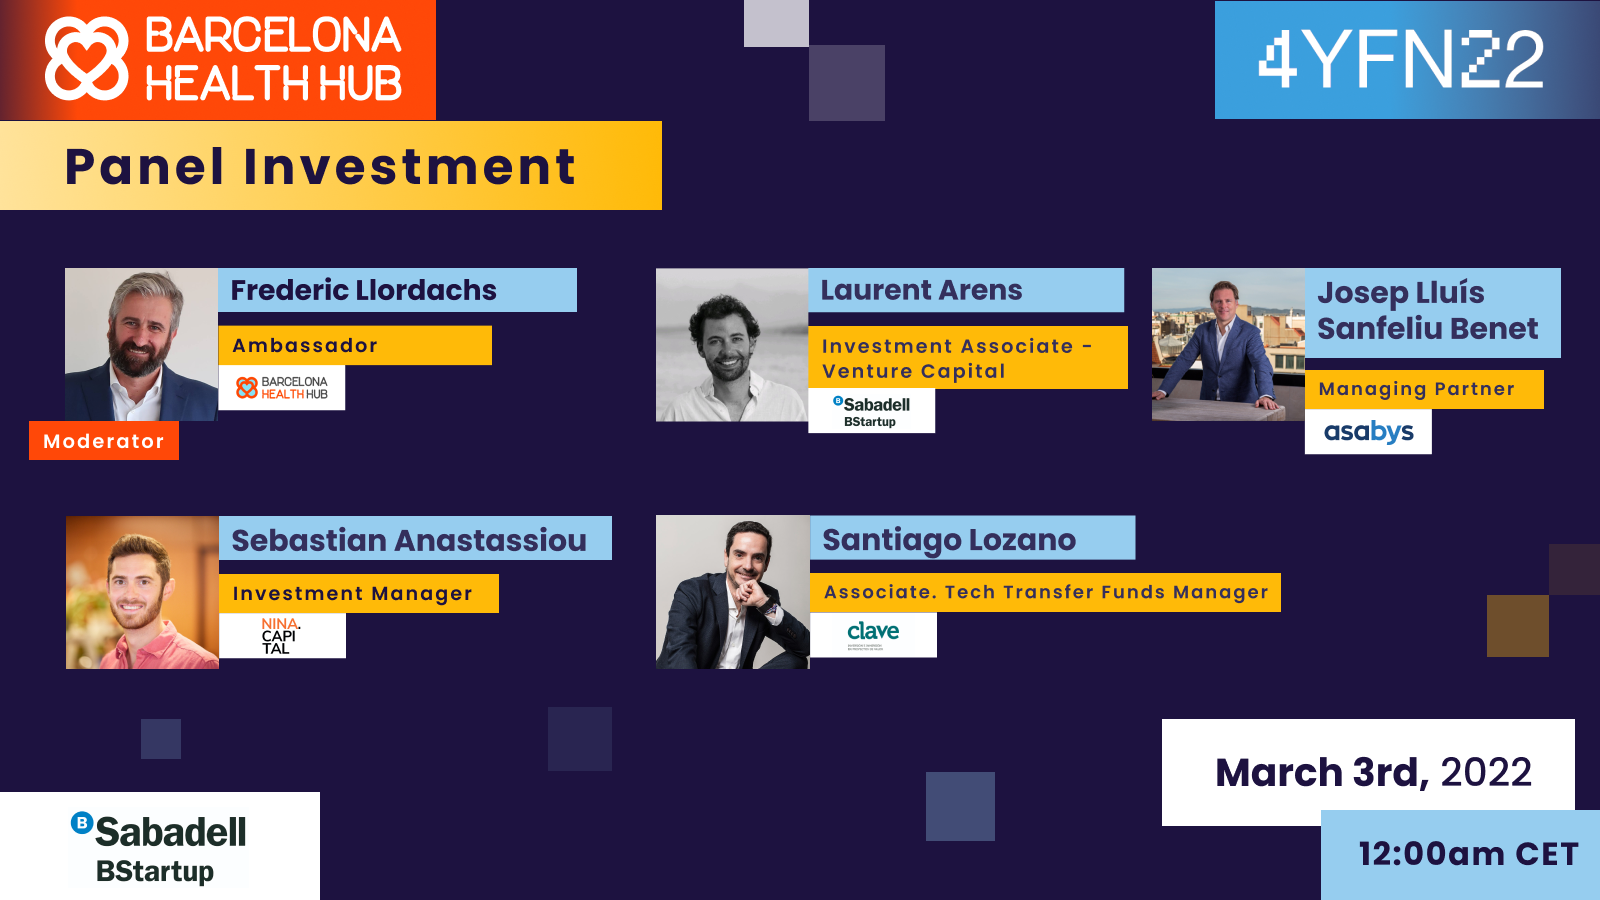 4YFN - Don't miss the #BHHPanel about Investment on March 3rd!